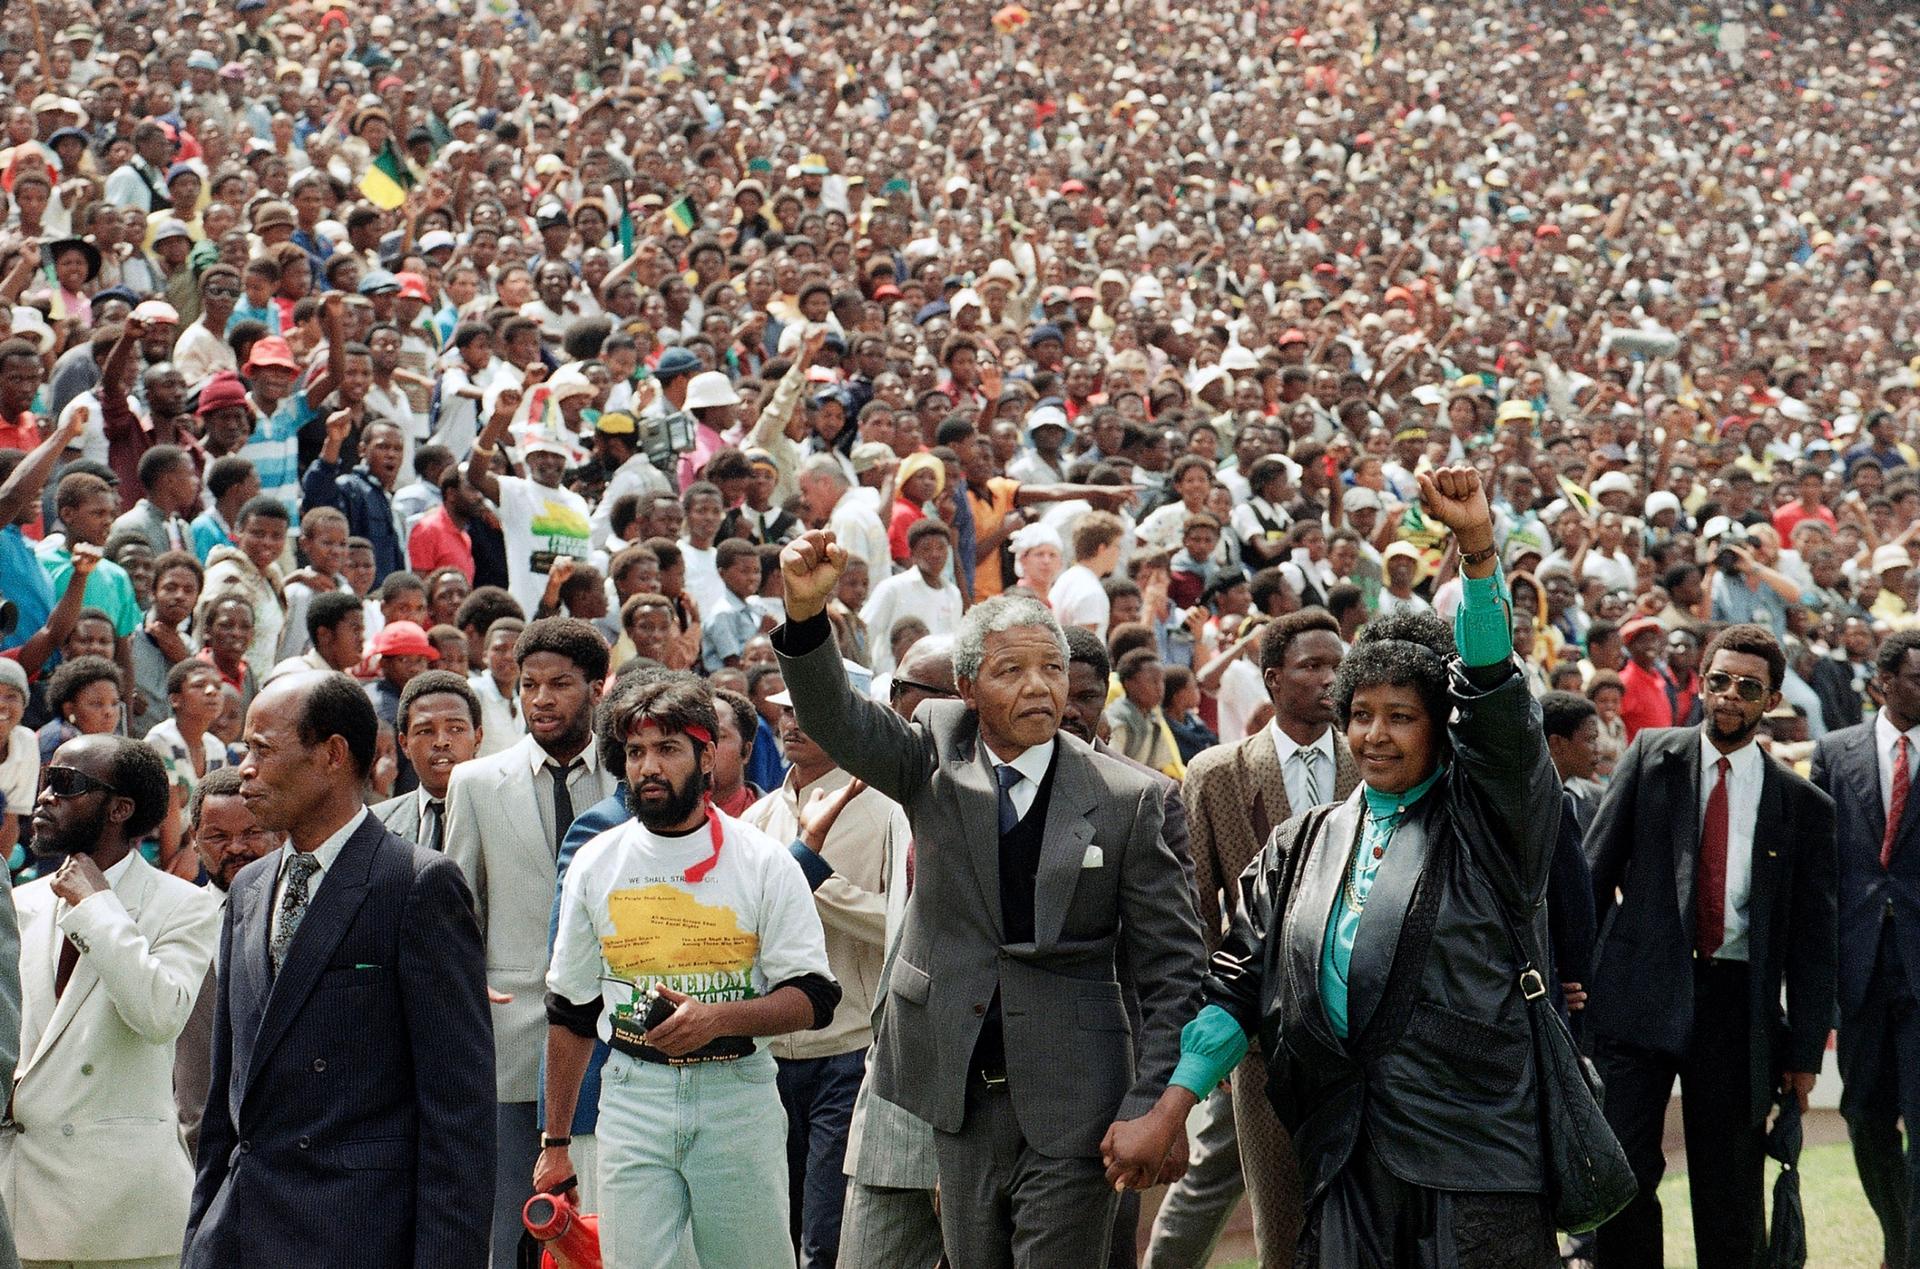 Nelson Mandela, center left, and his wife Winnie, center right, raise clenched fists as they arrive at a welcoming rally in Soweto.